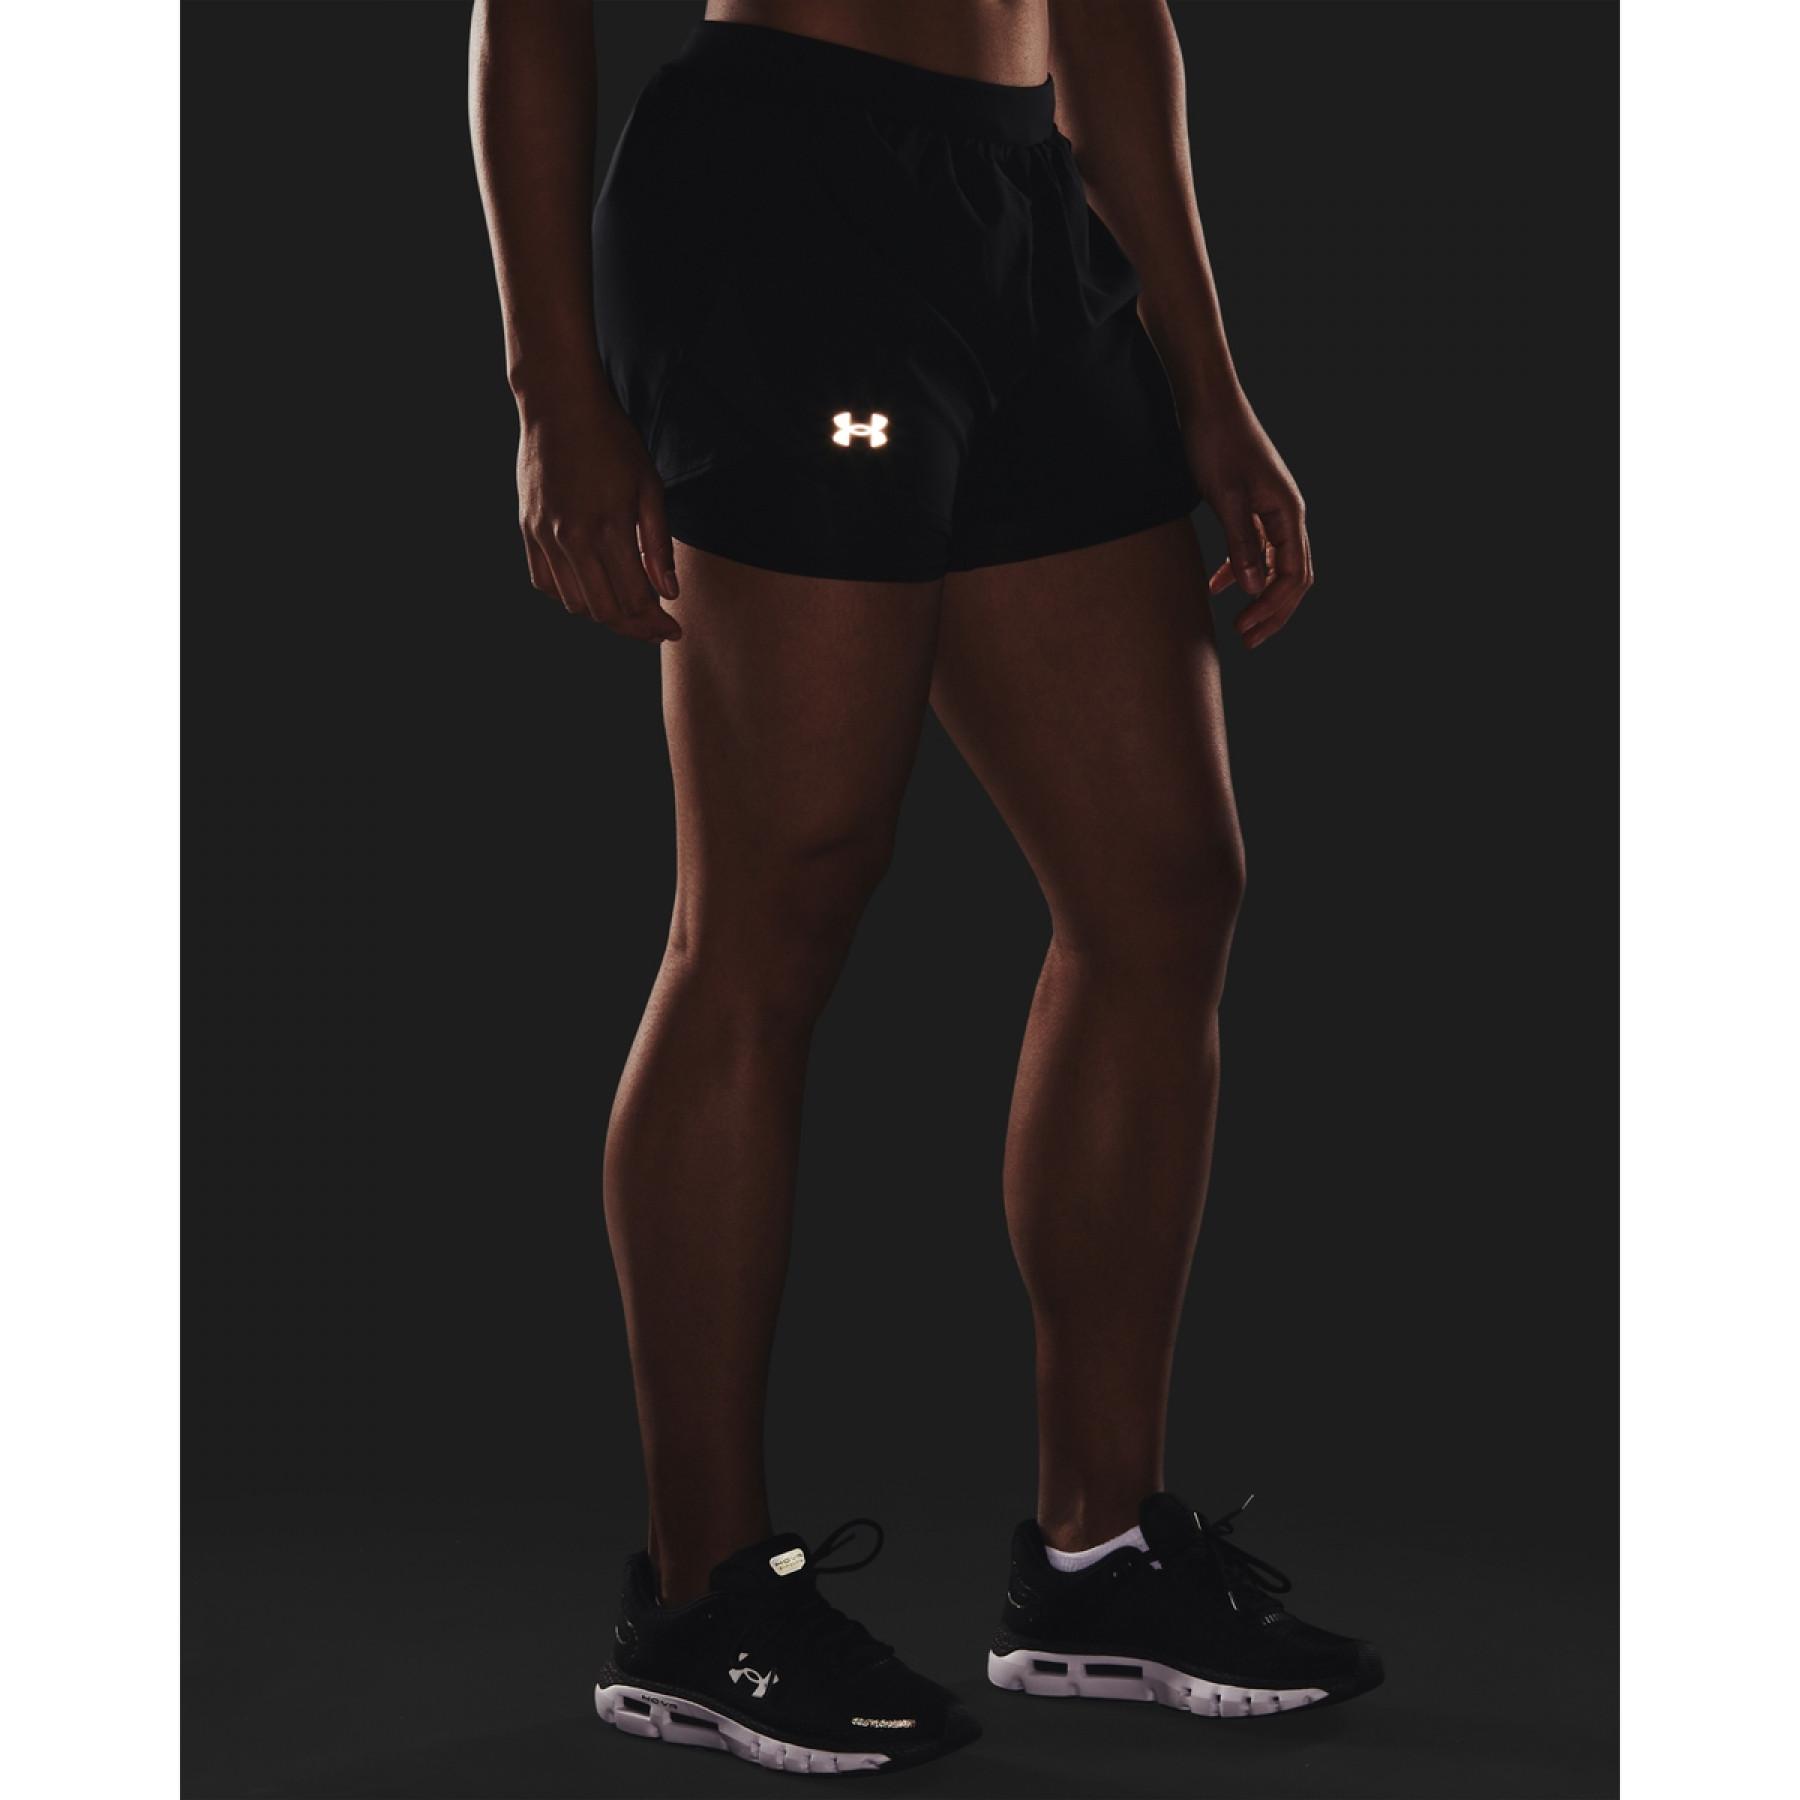 Women's shorts Under Armour Fly By 2.0 2-in-1